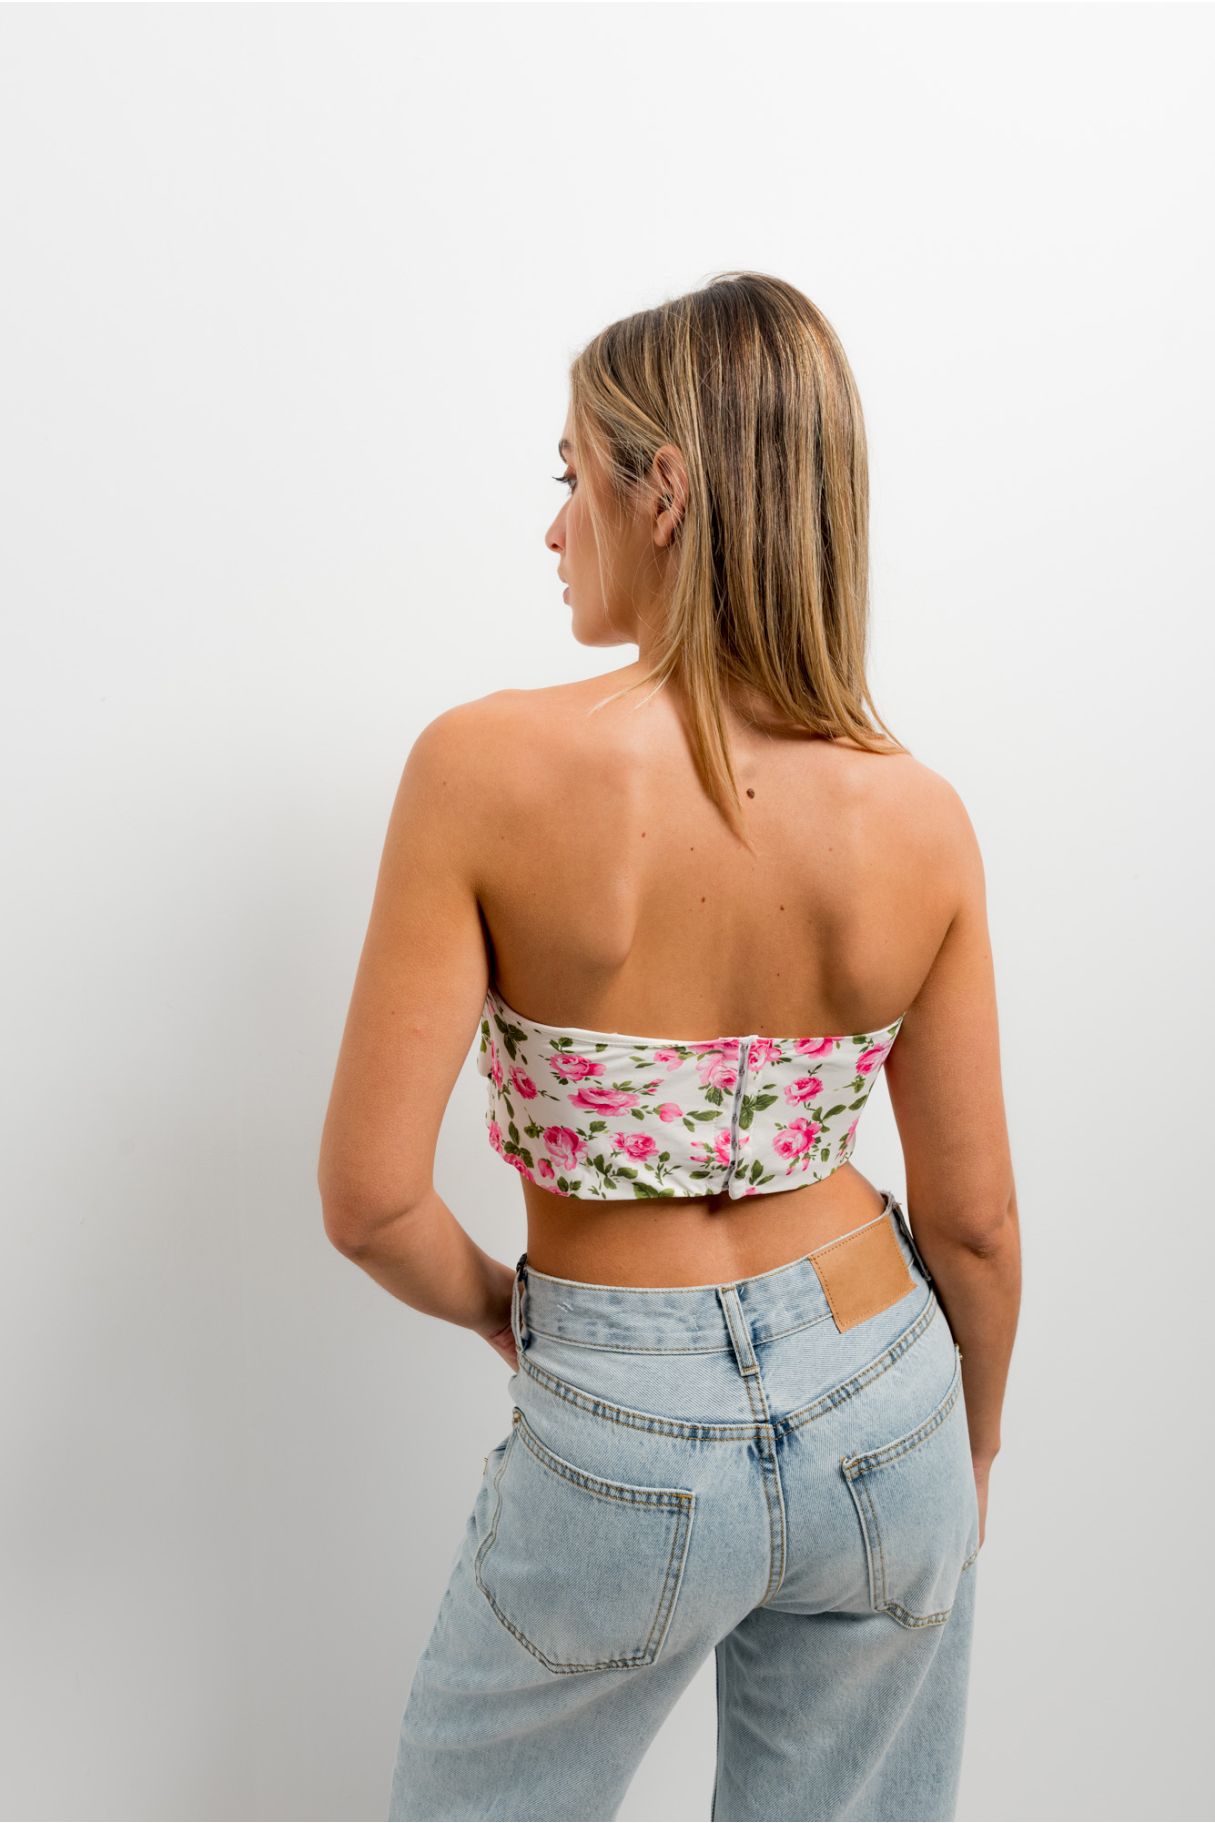 FLORAL PRINT CORSETRY-INSPIRED TOP